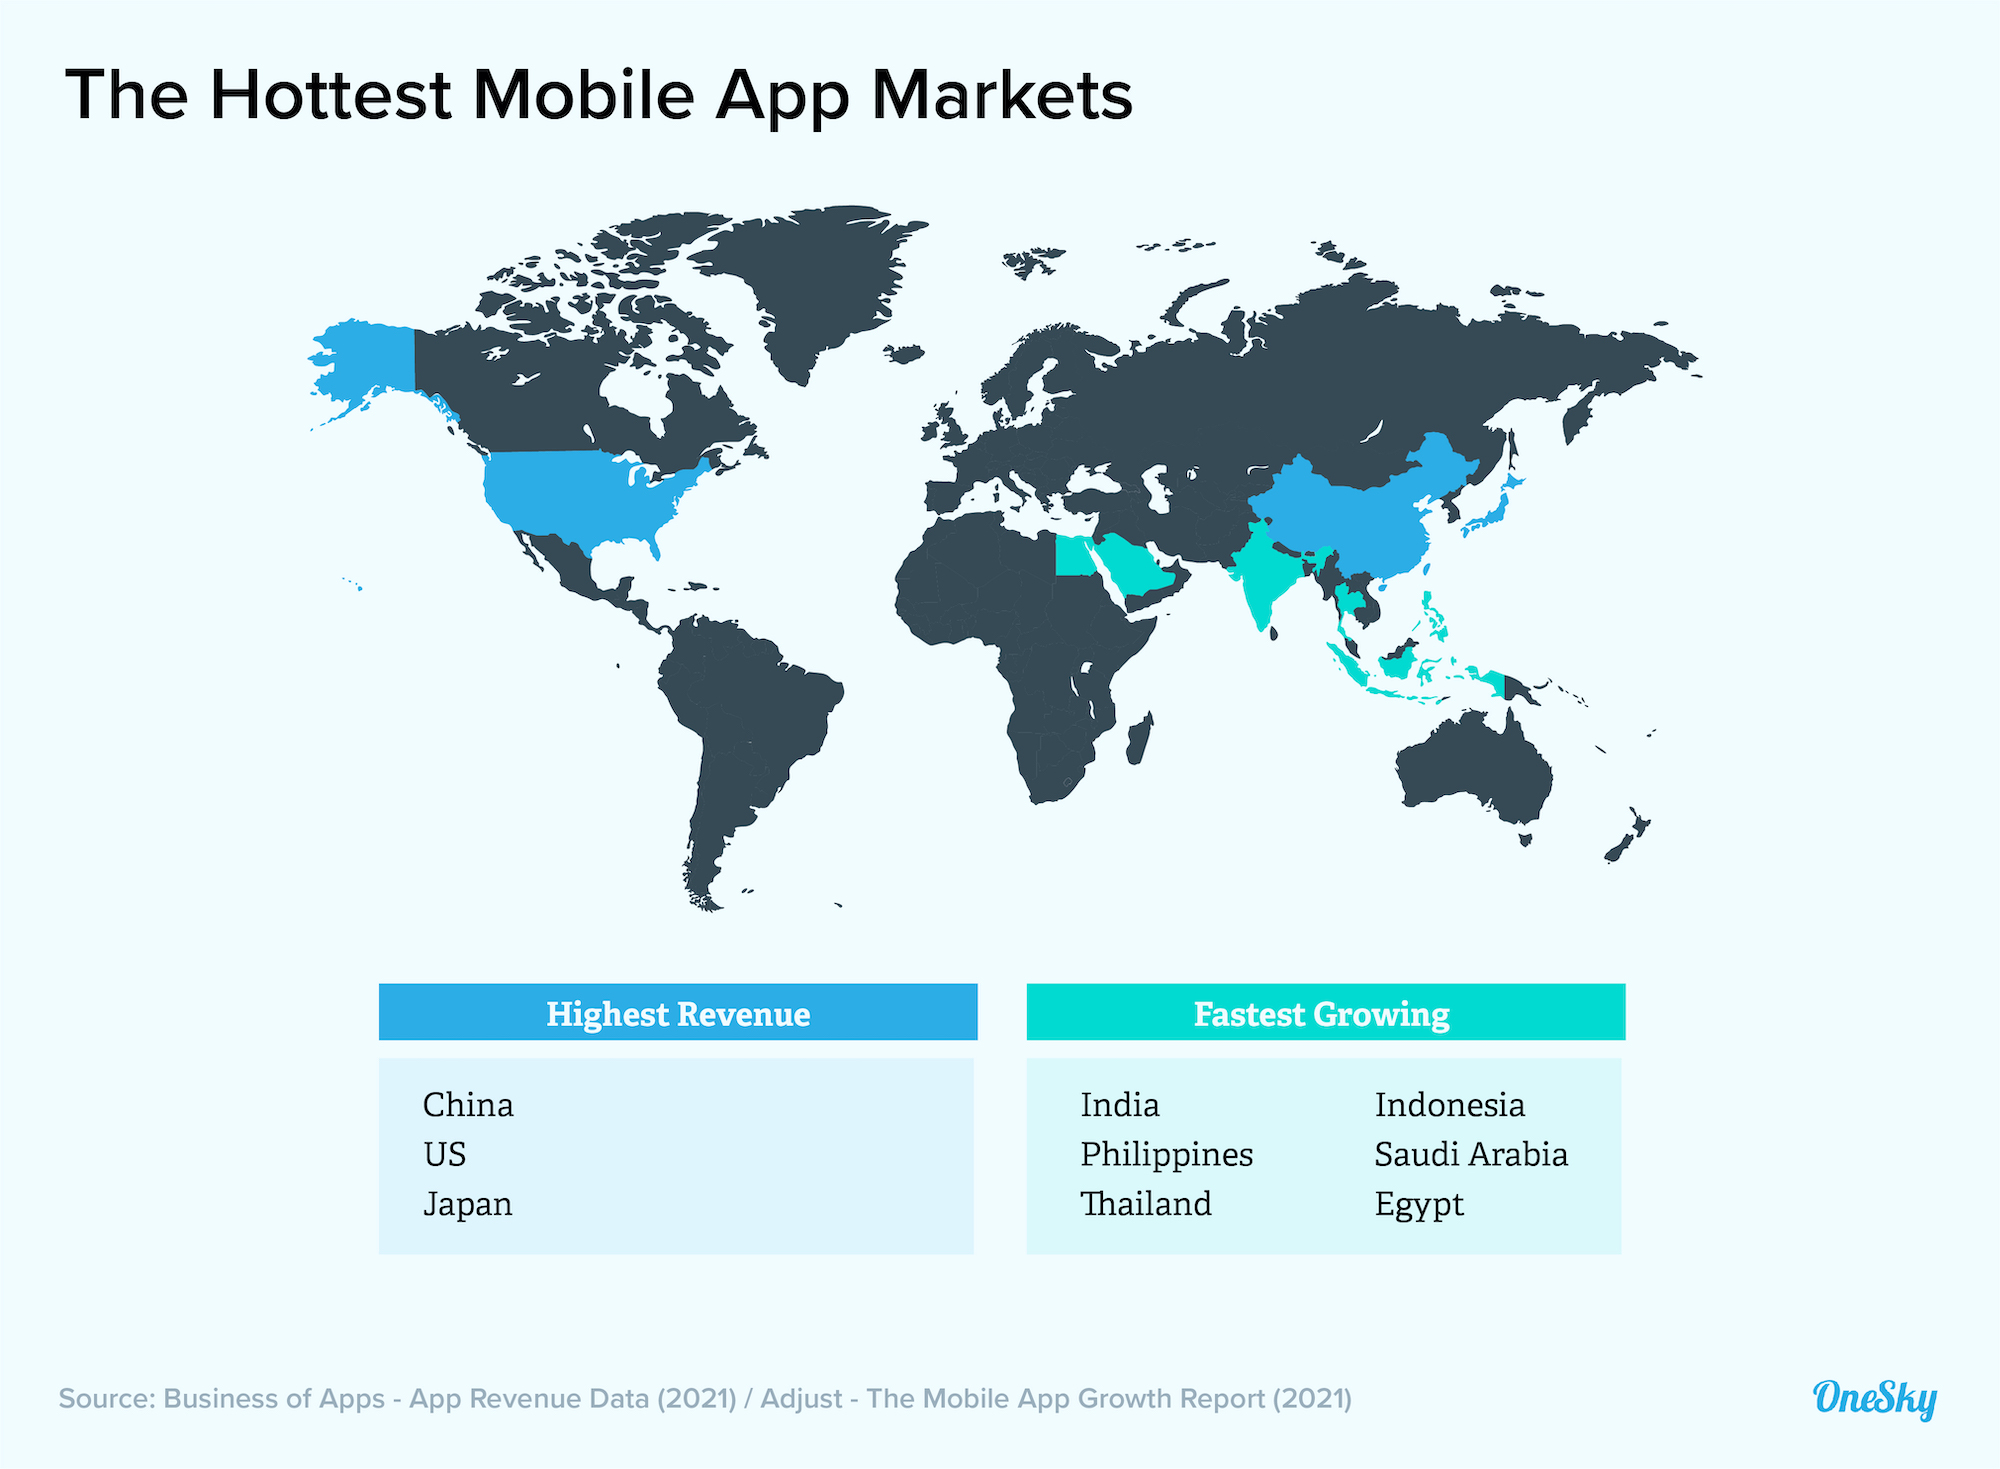 What Are the Benefits of Localizing Your Mobile App?